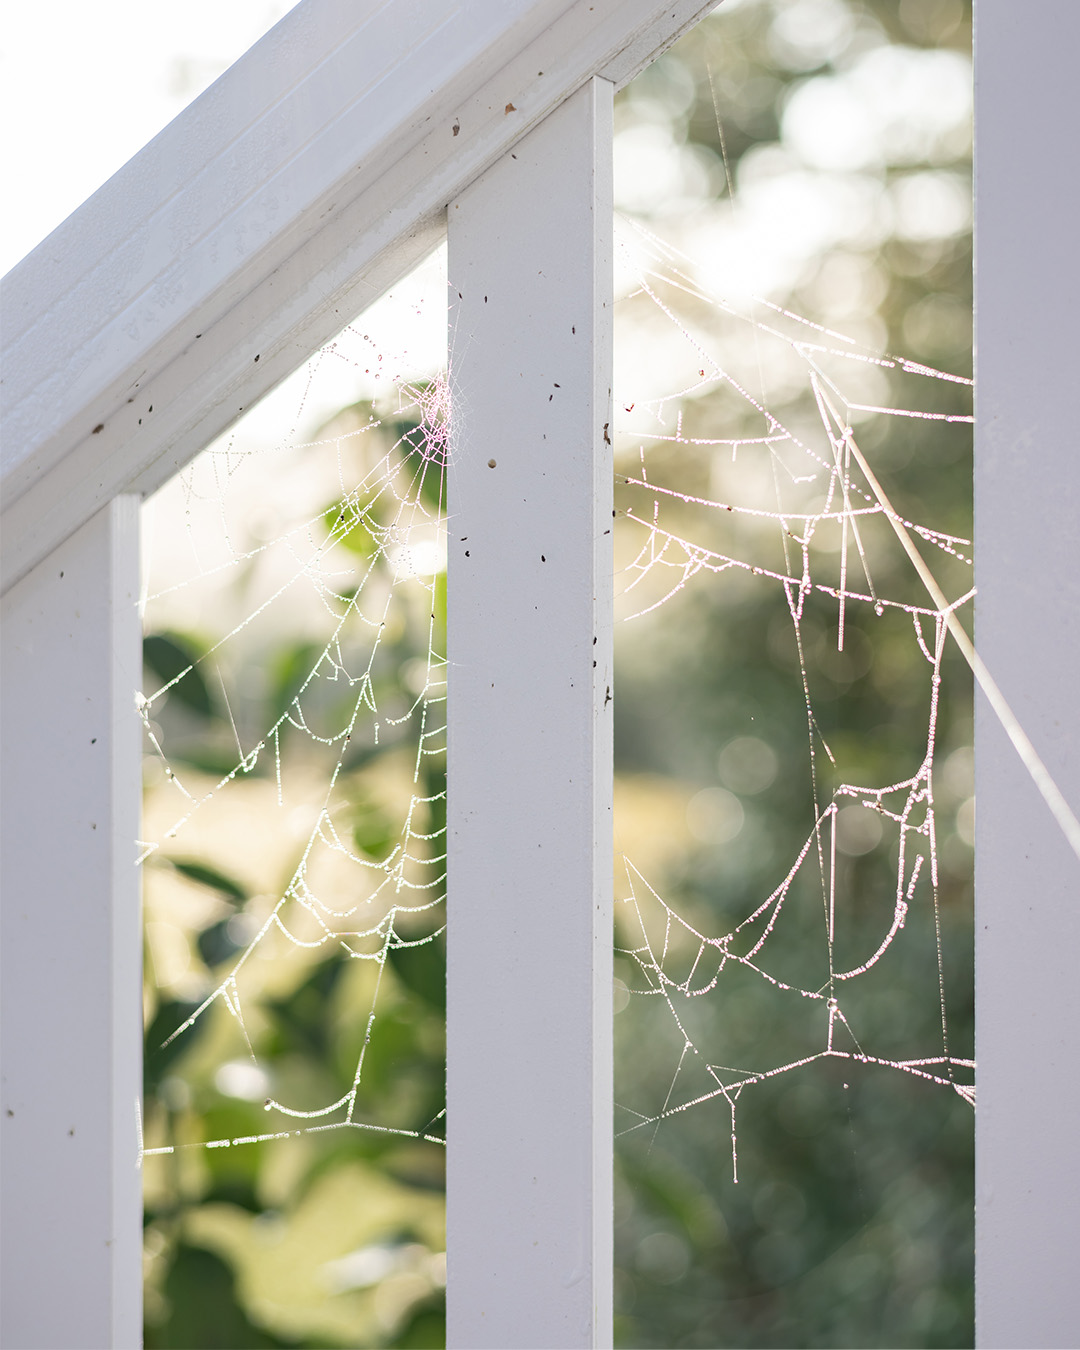 Spider webs and bugs on a porch railing.